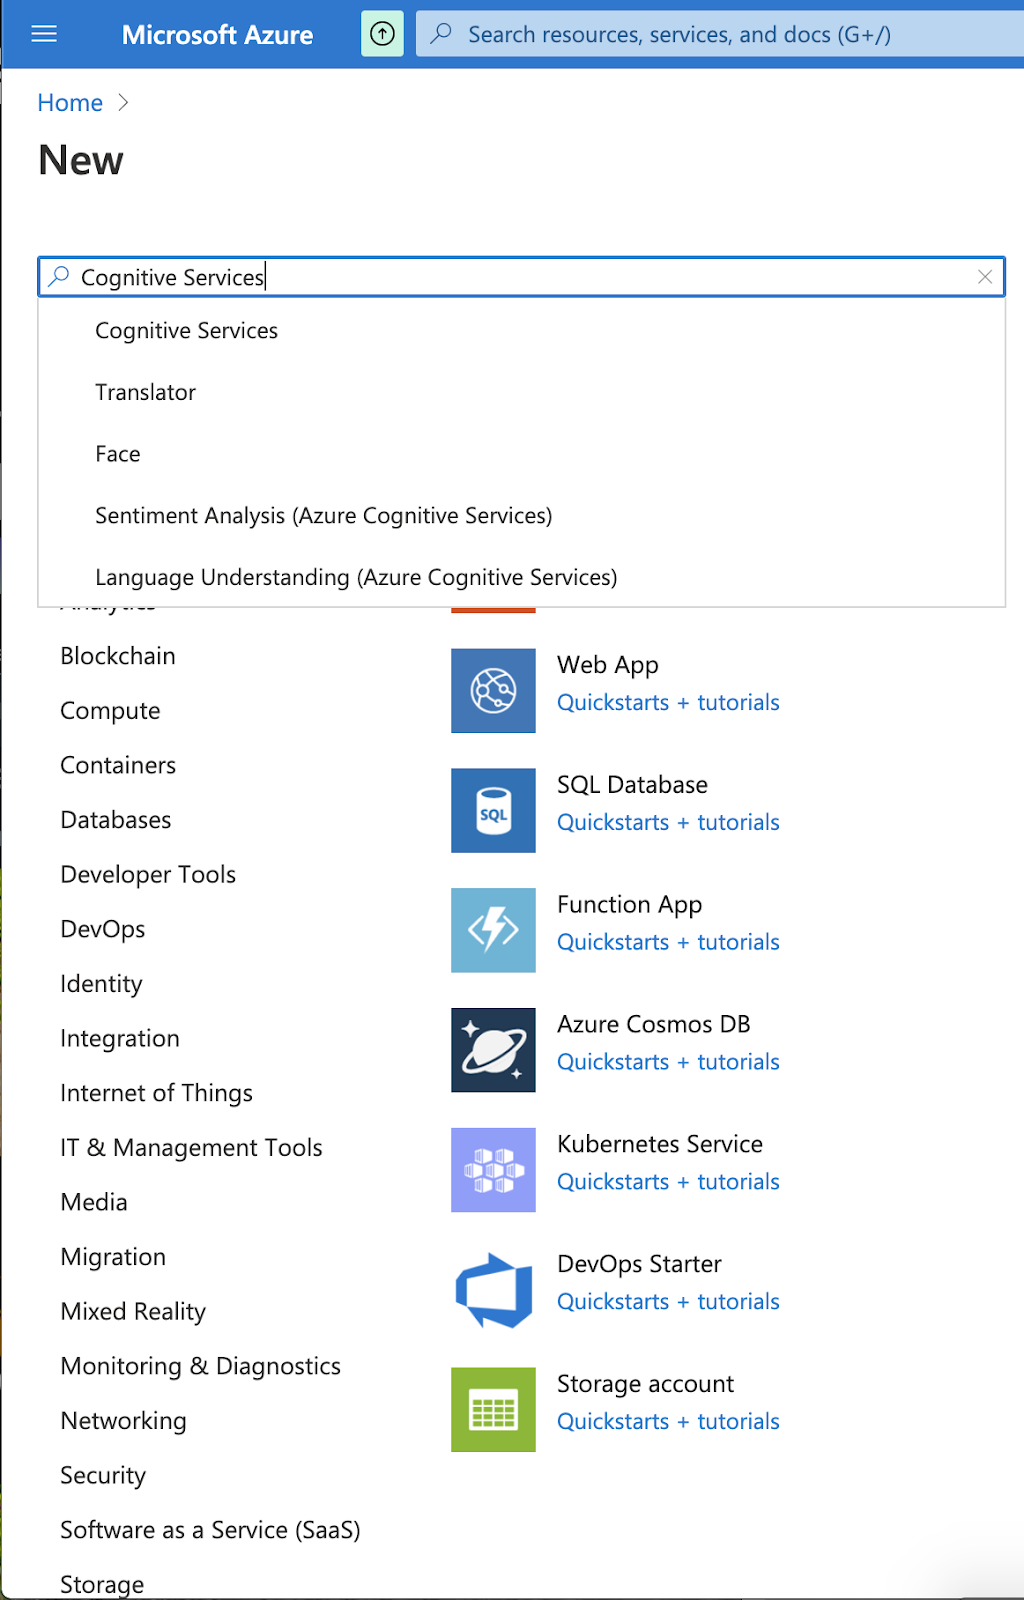 Microsoft Azure Search for New Cognitive Services